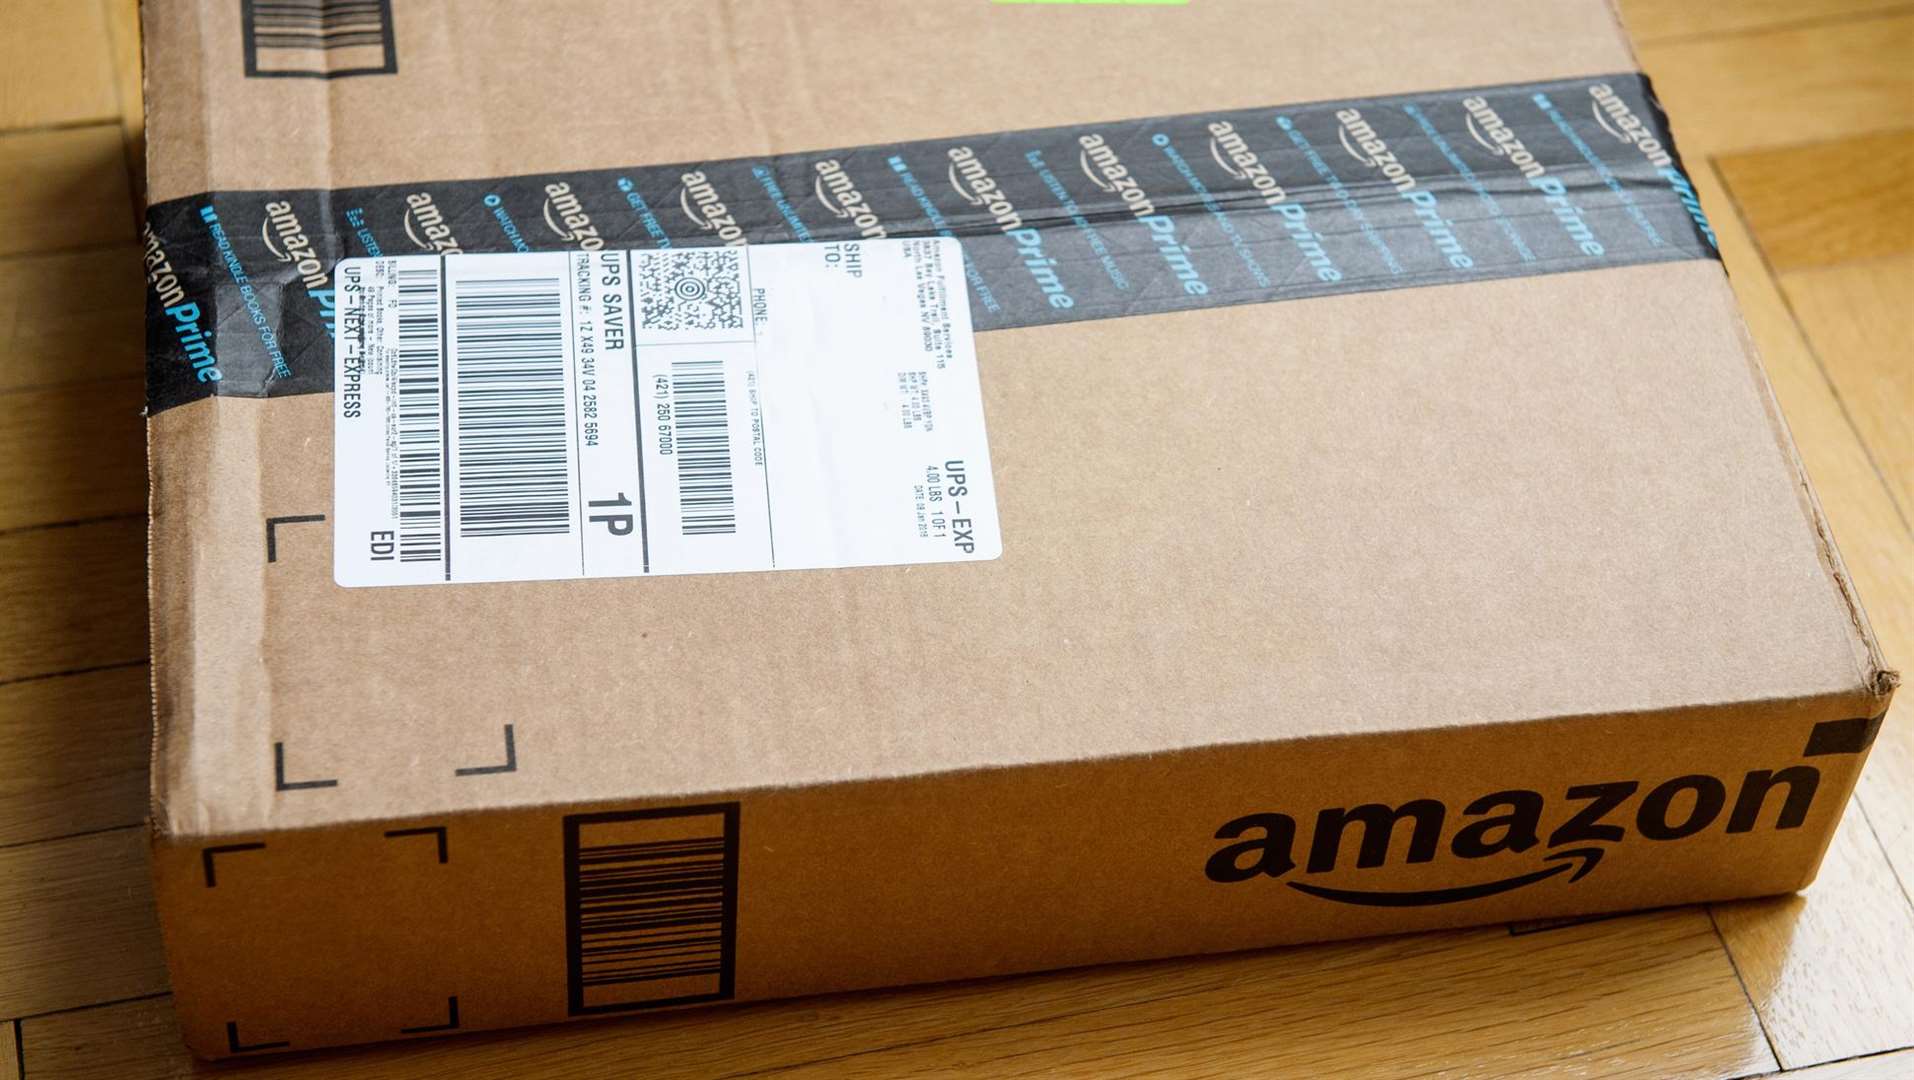 Around a million deals will be up for grabs for subscribers of Amazon Prime